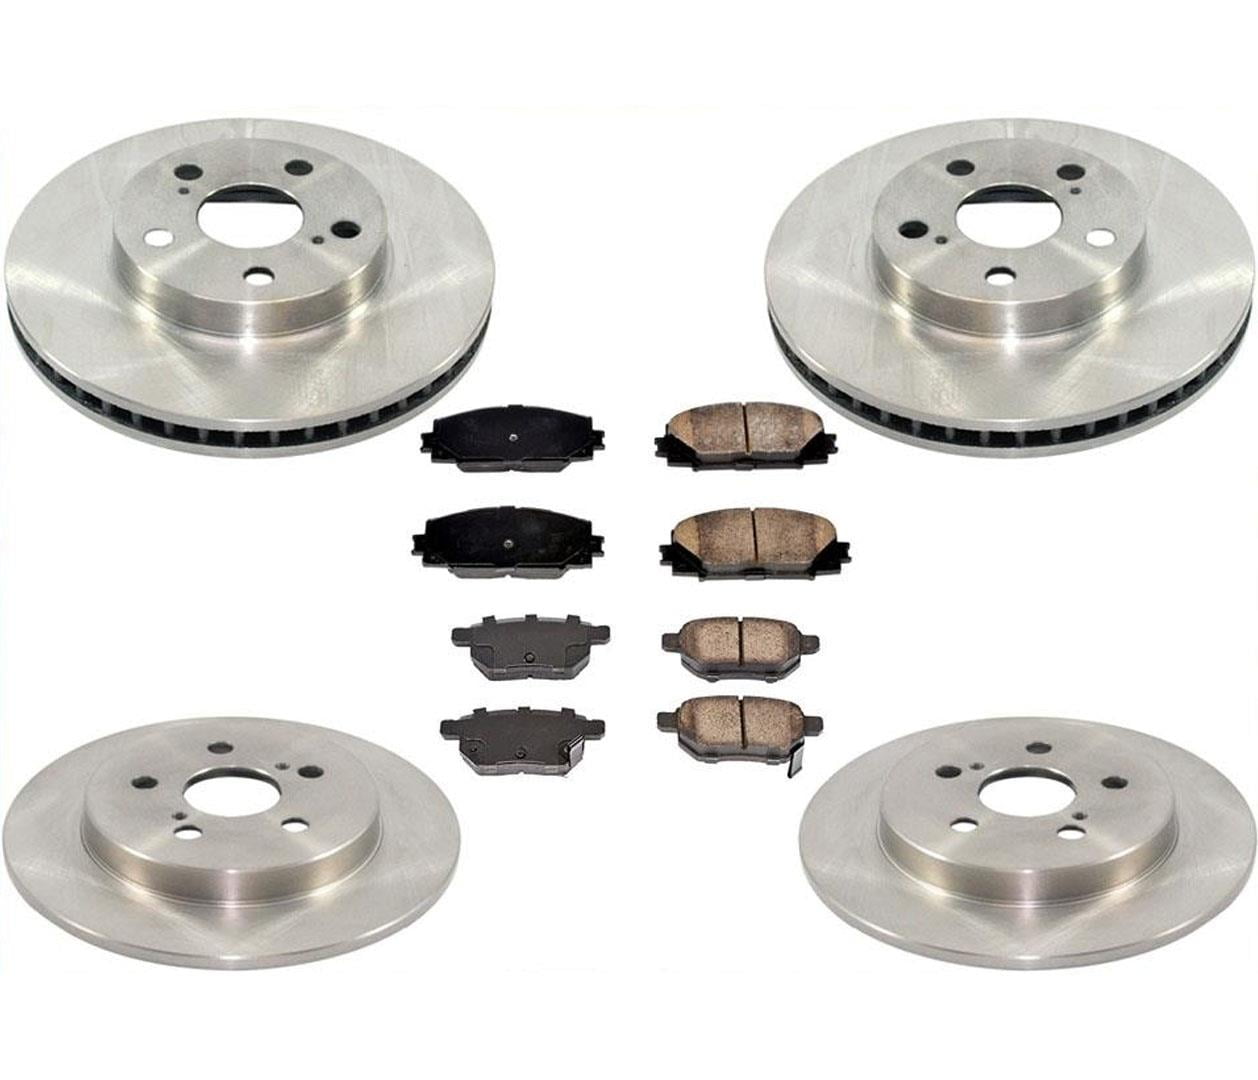 Transit Auto Front Disc Brake Rotors and Ceramic Pads Kit for Car